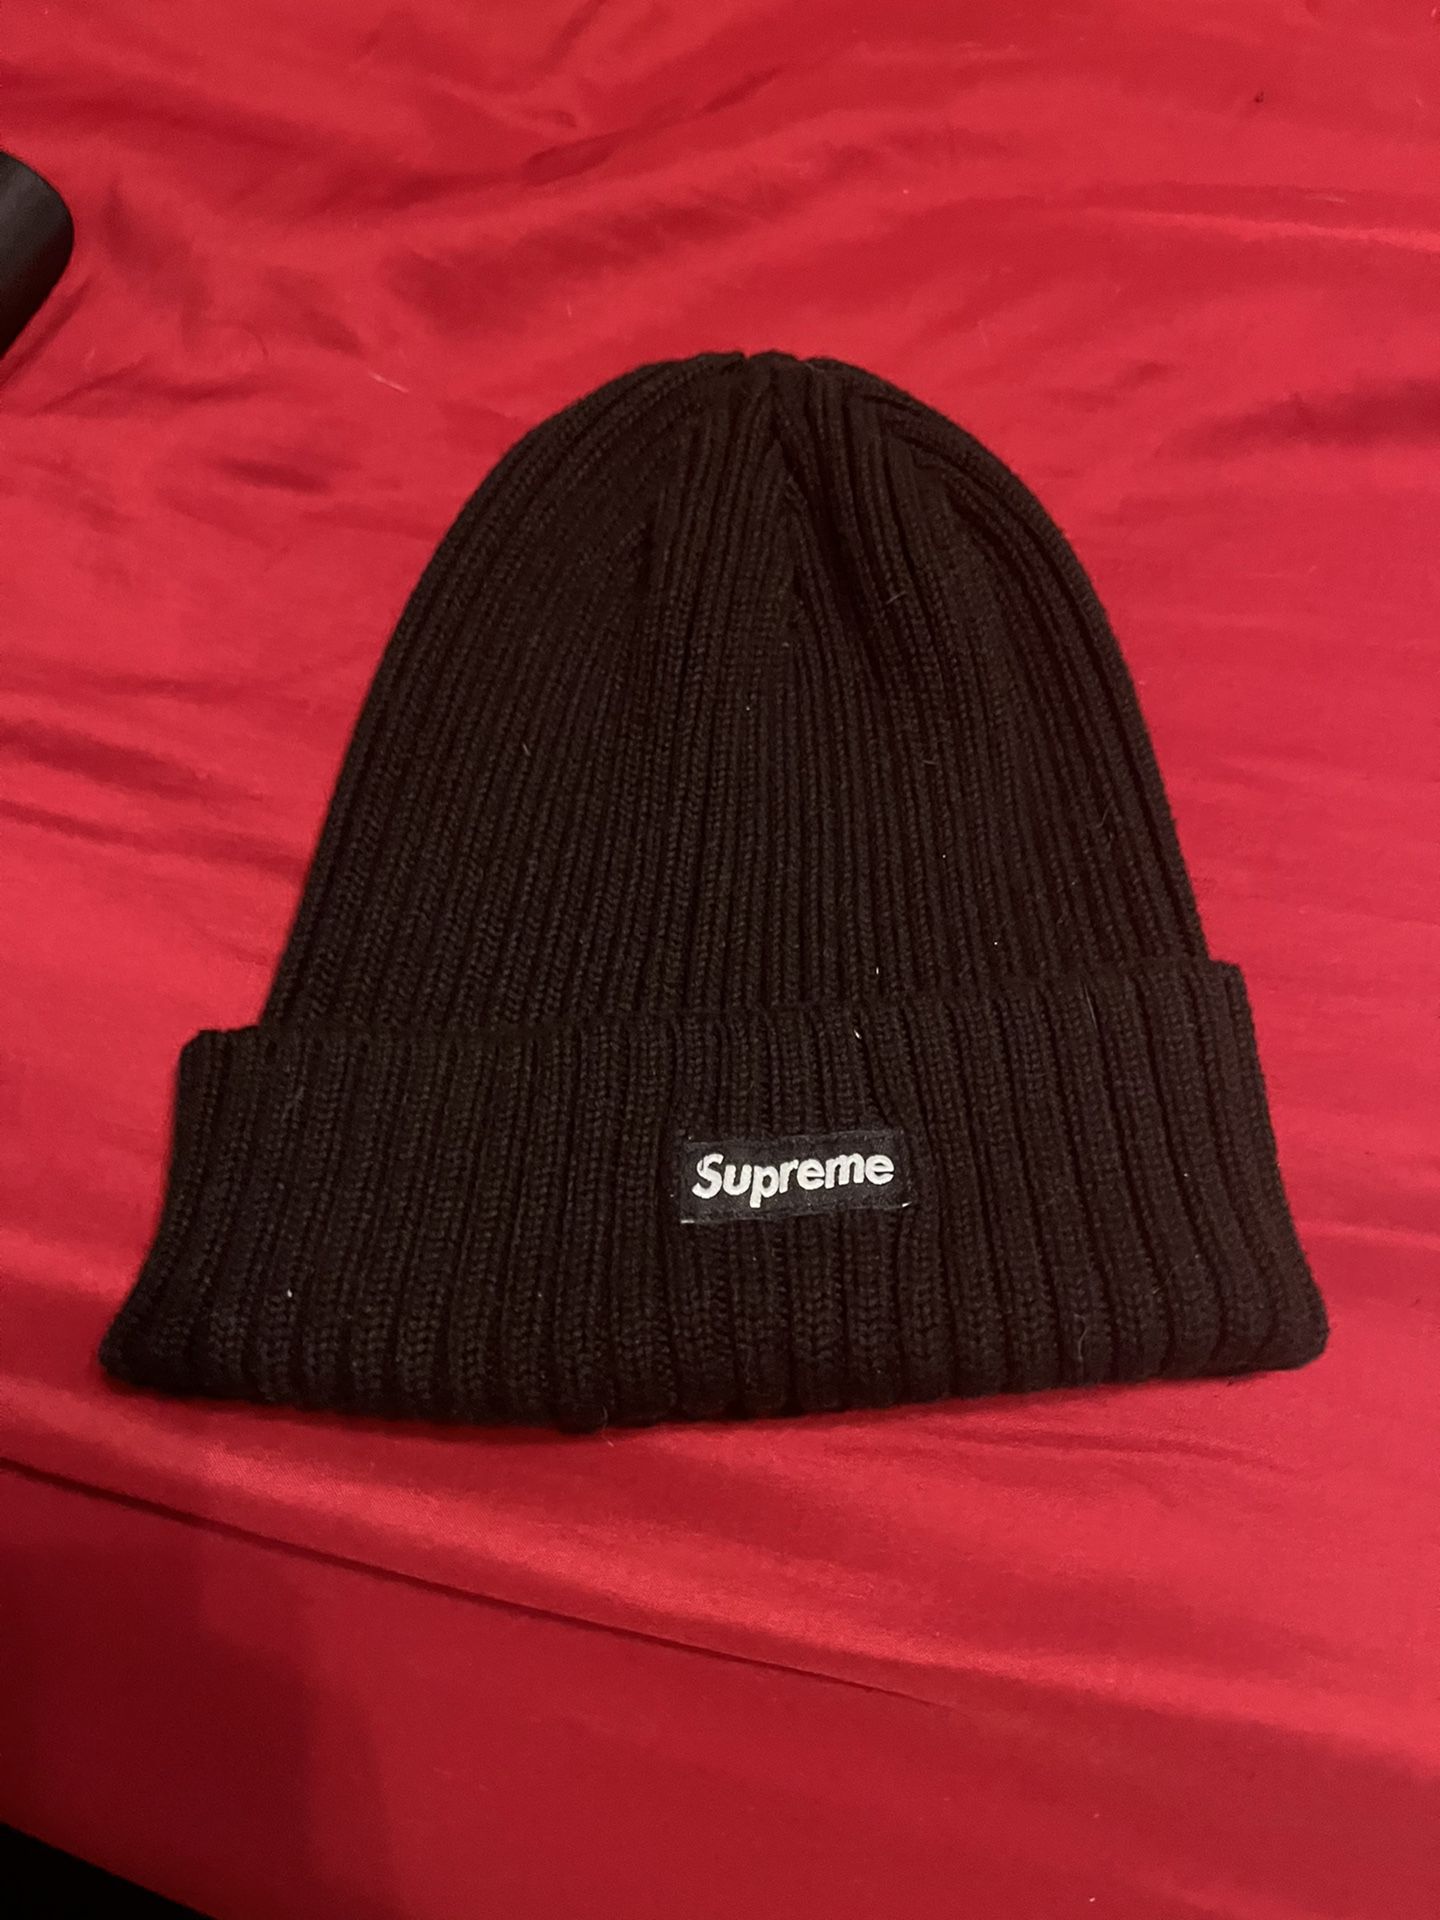 Supreme Beanies for Sale in San Antonio, TX - OfferUp